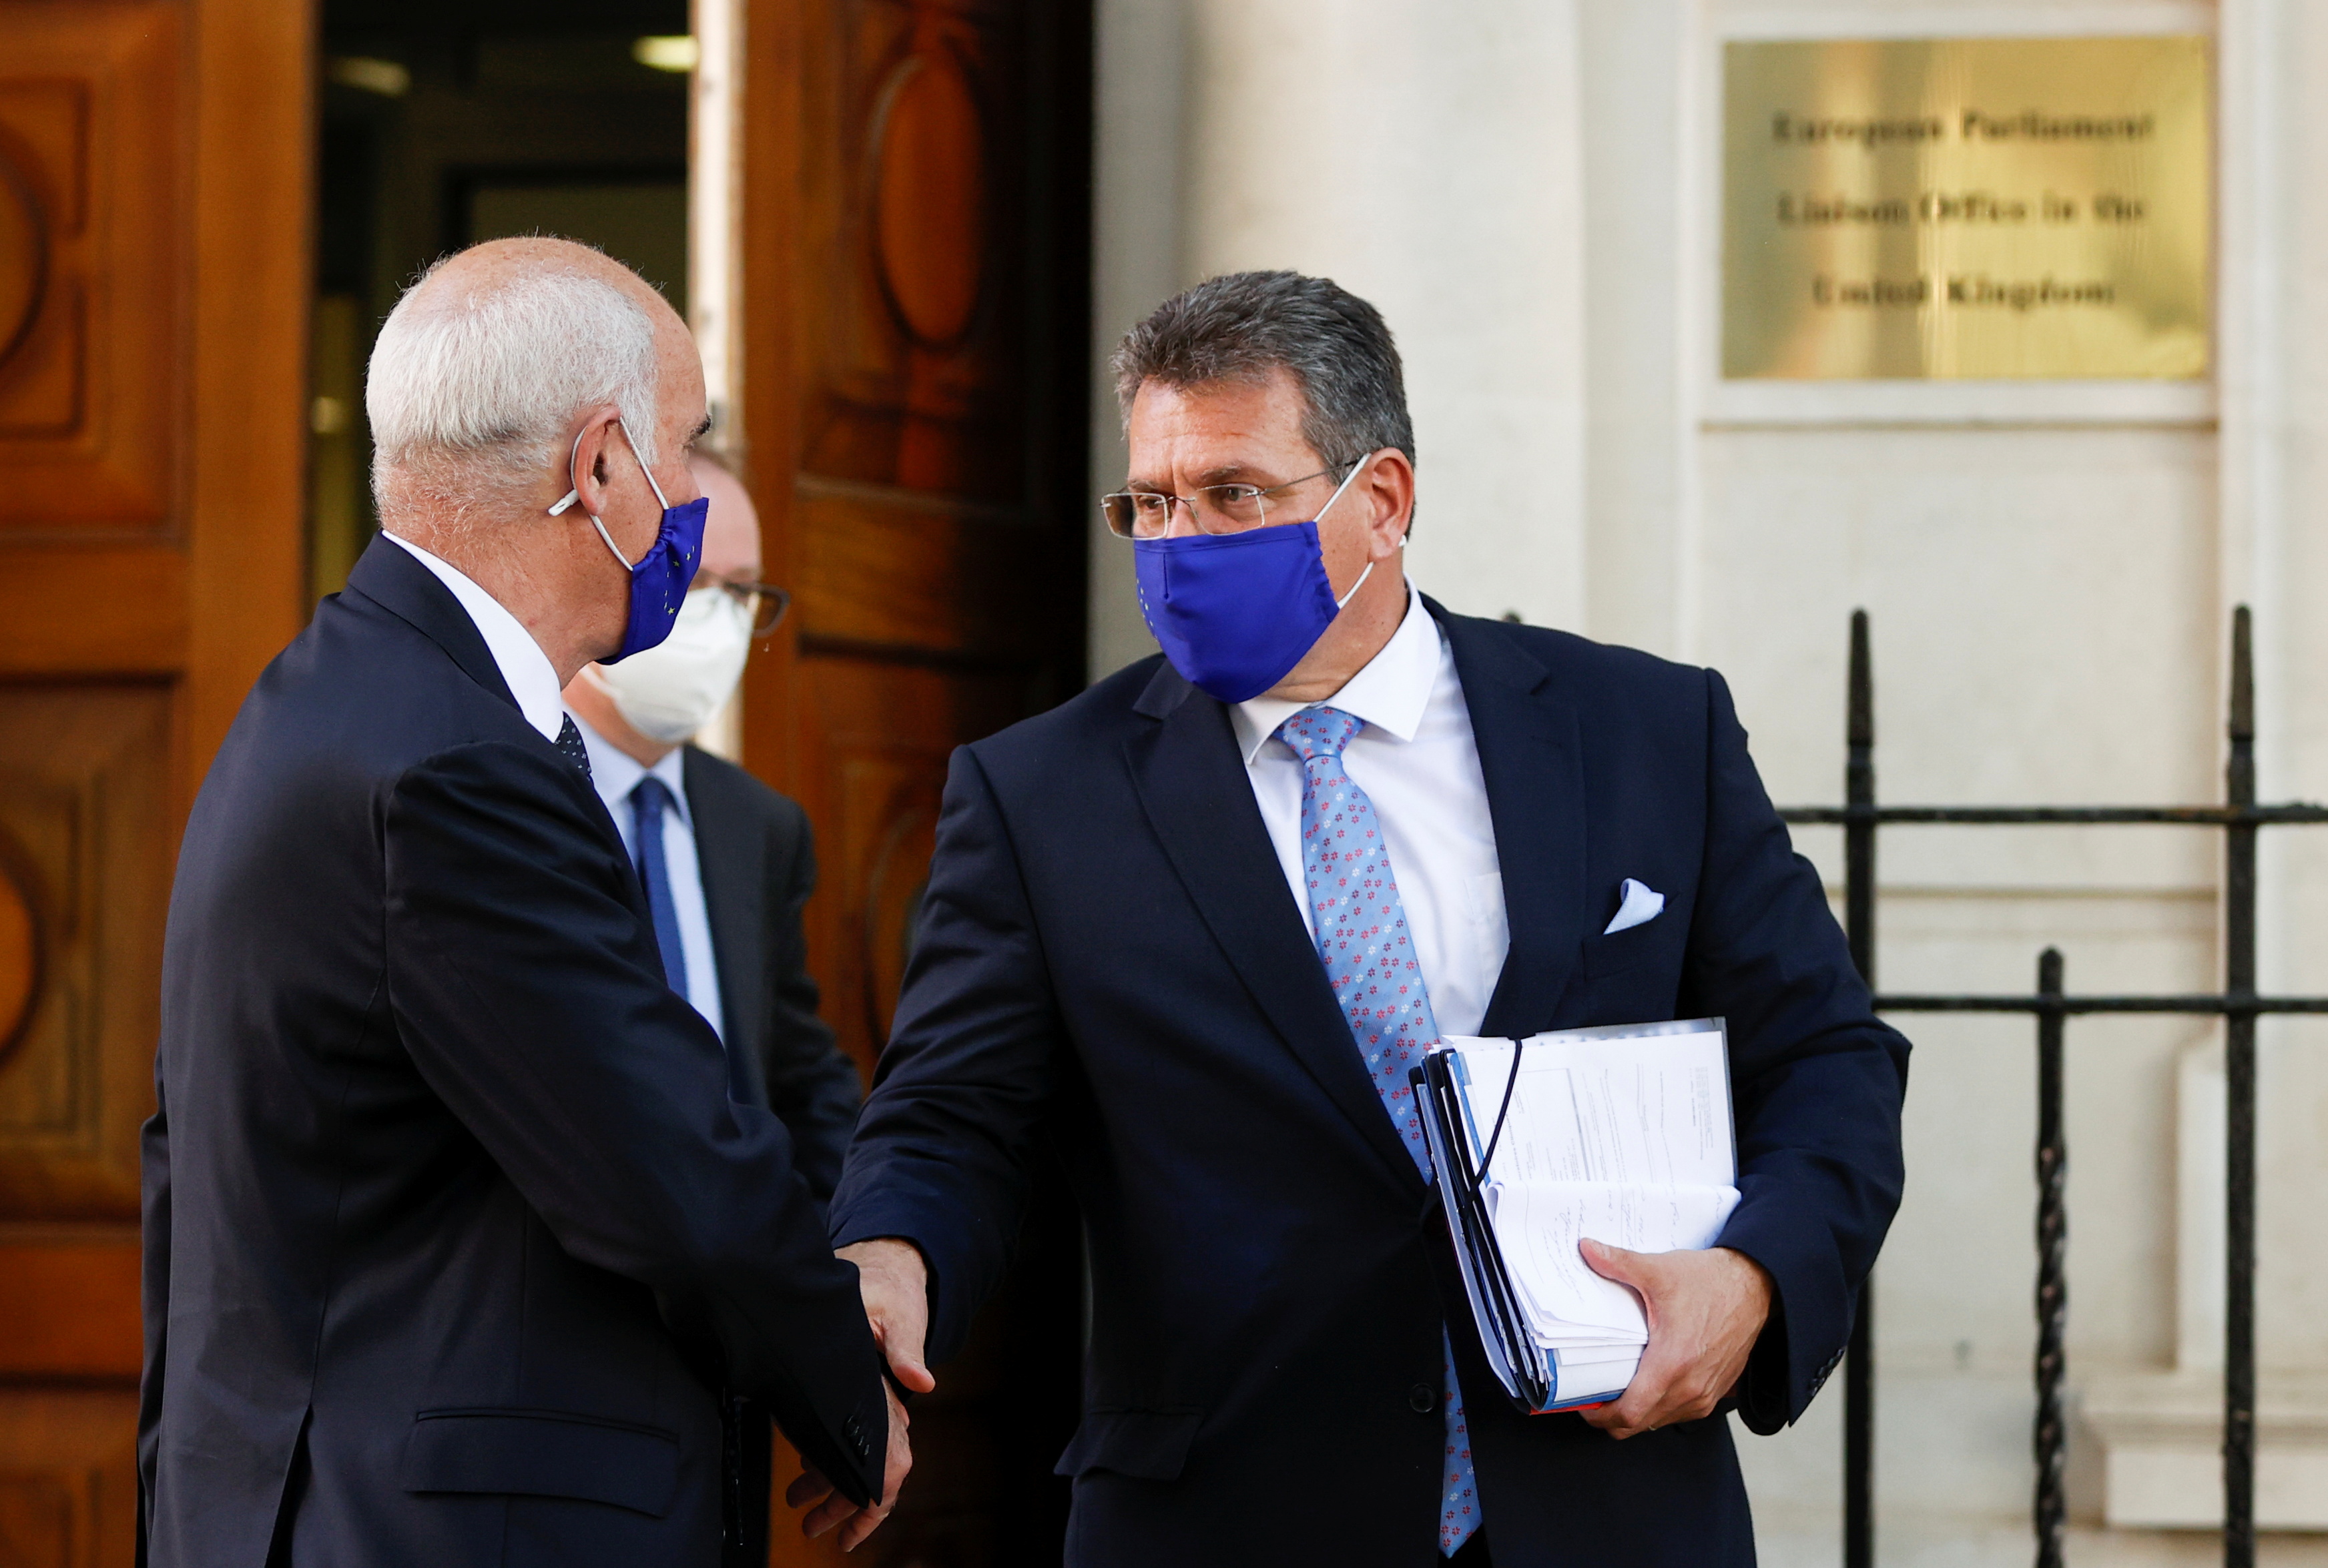 European Commission Vice-President Maros Sefcovic leaves Europe House in London